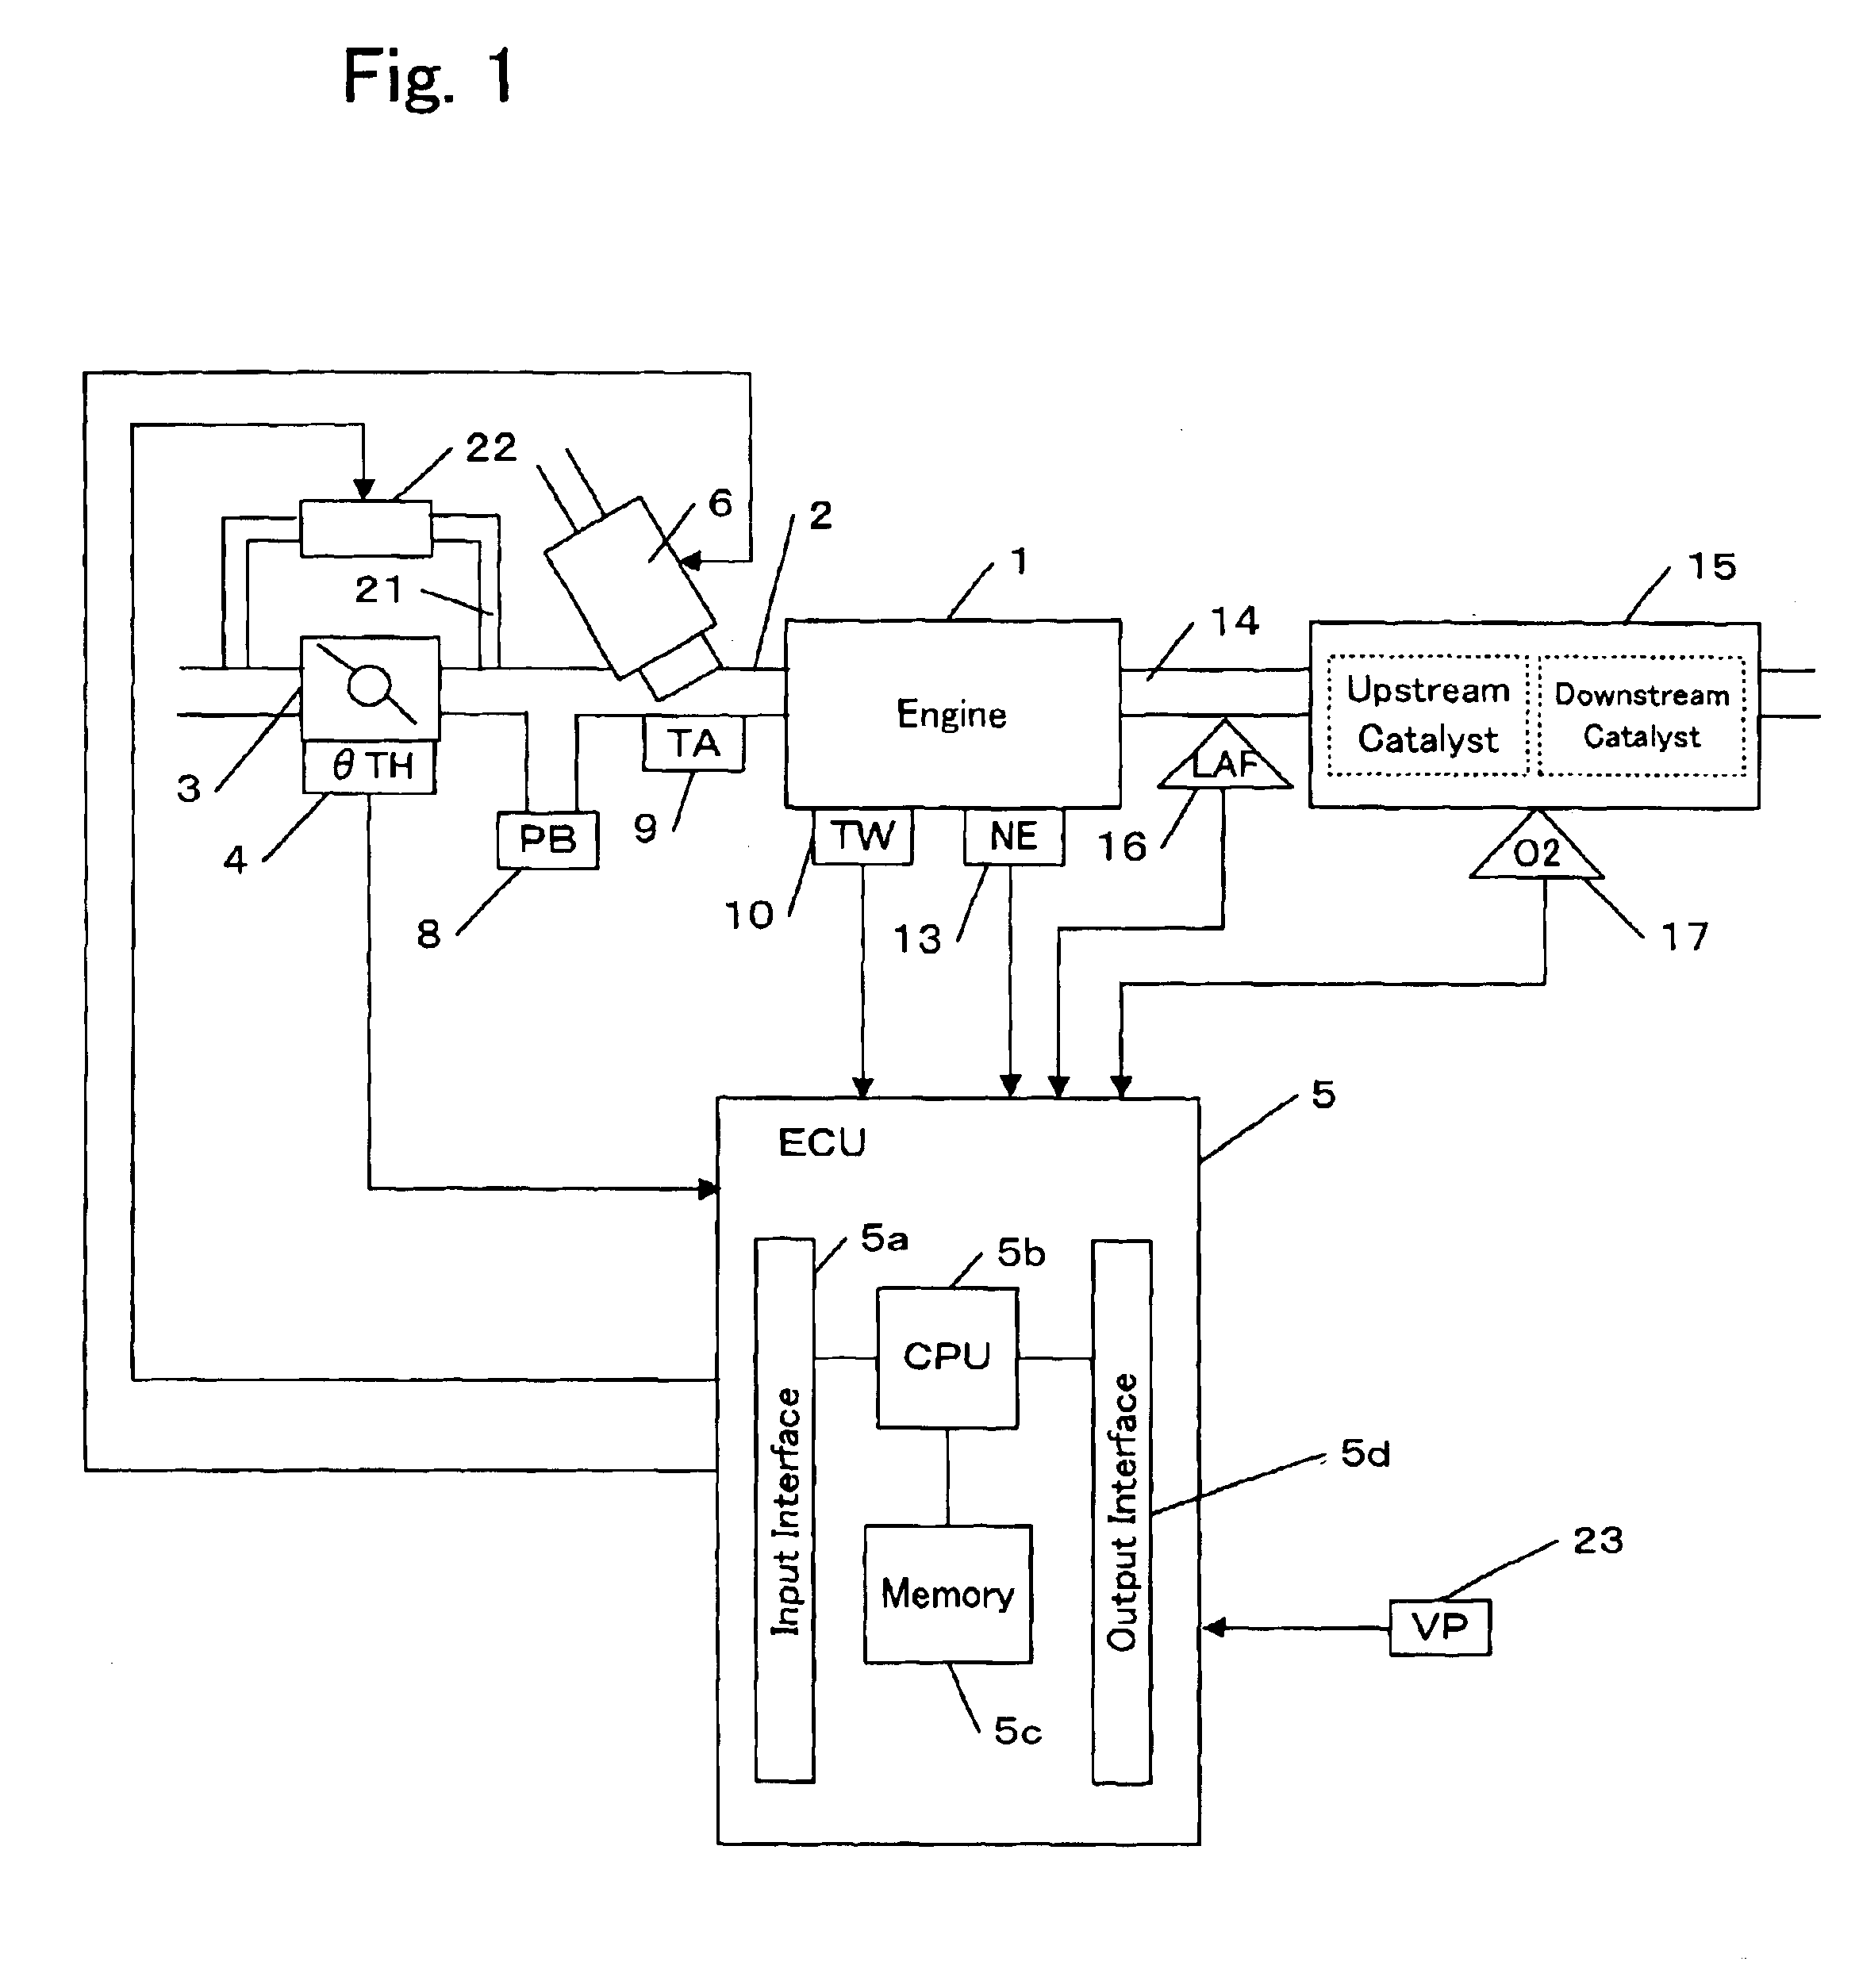 Apparatus and method for detecting failure of exhaust gas sensor